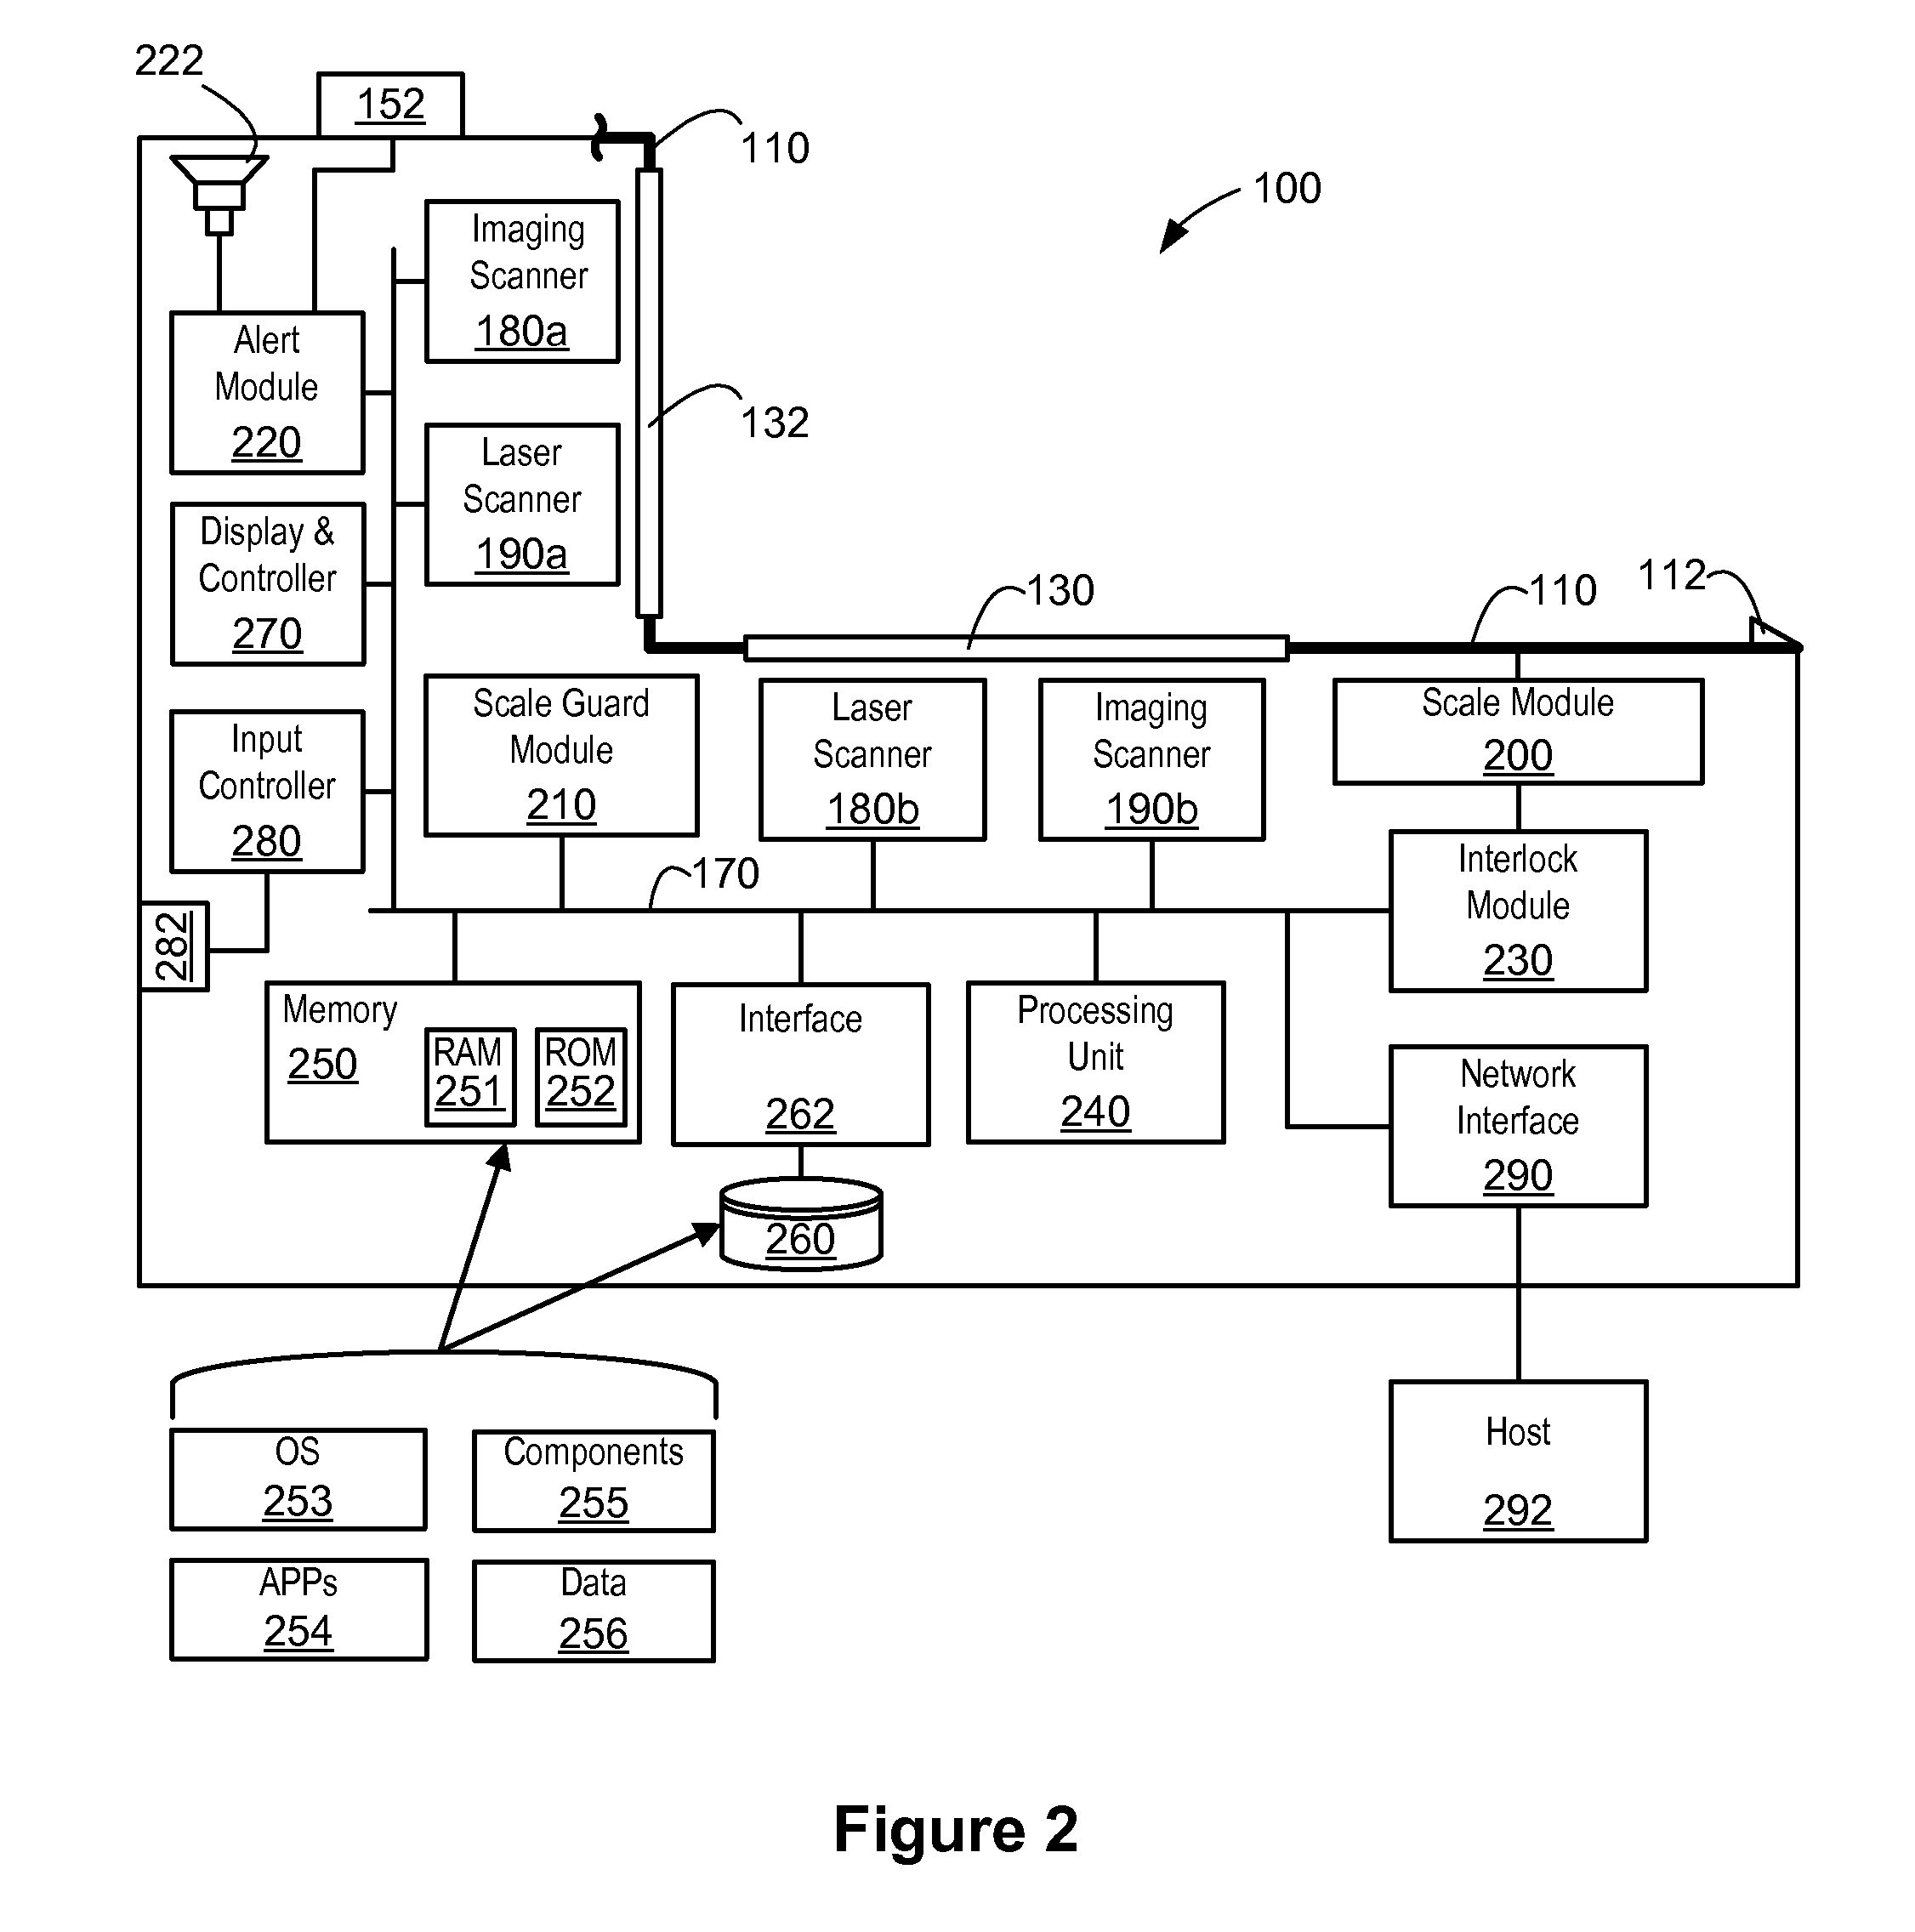 Systems and methods for reducing weighing errors associated with partially off-scale items